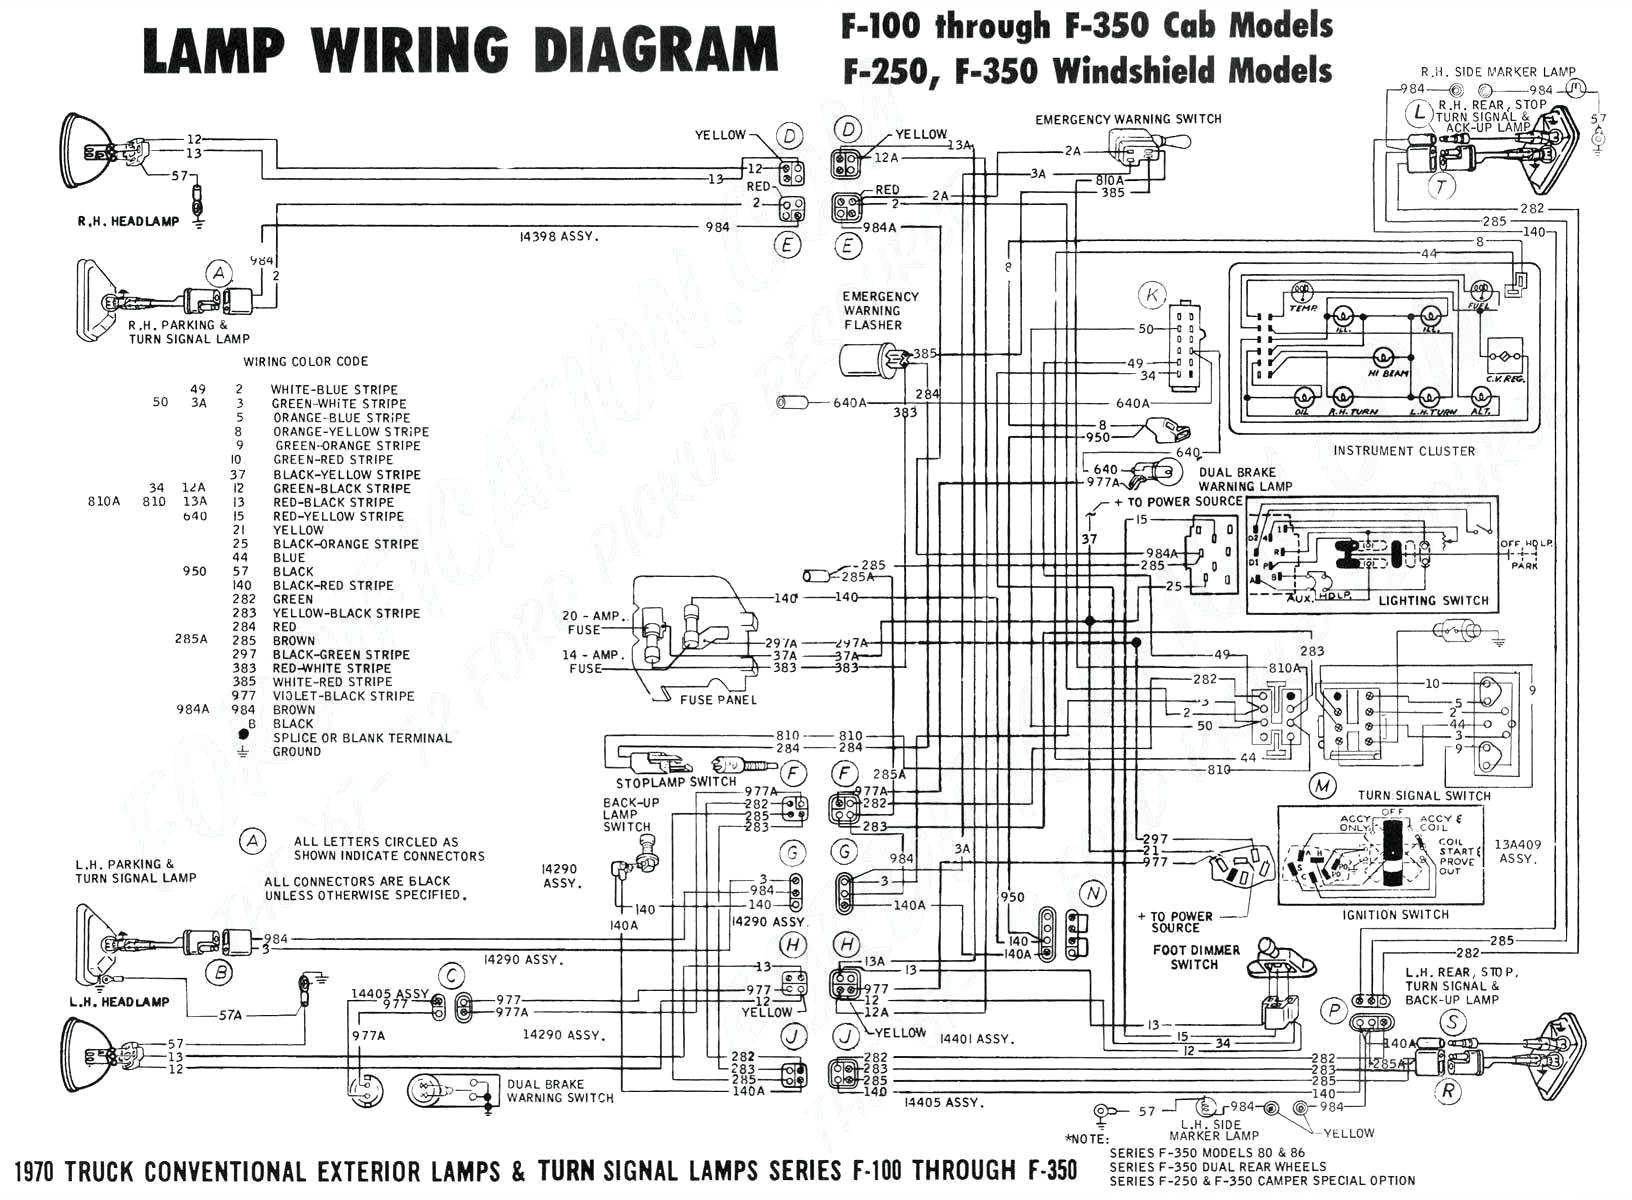 72 mercedes benz wiring diagrams home wiring diagram 1972 mercedes benz wiring diagrams wiring diagram pass